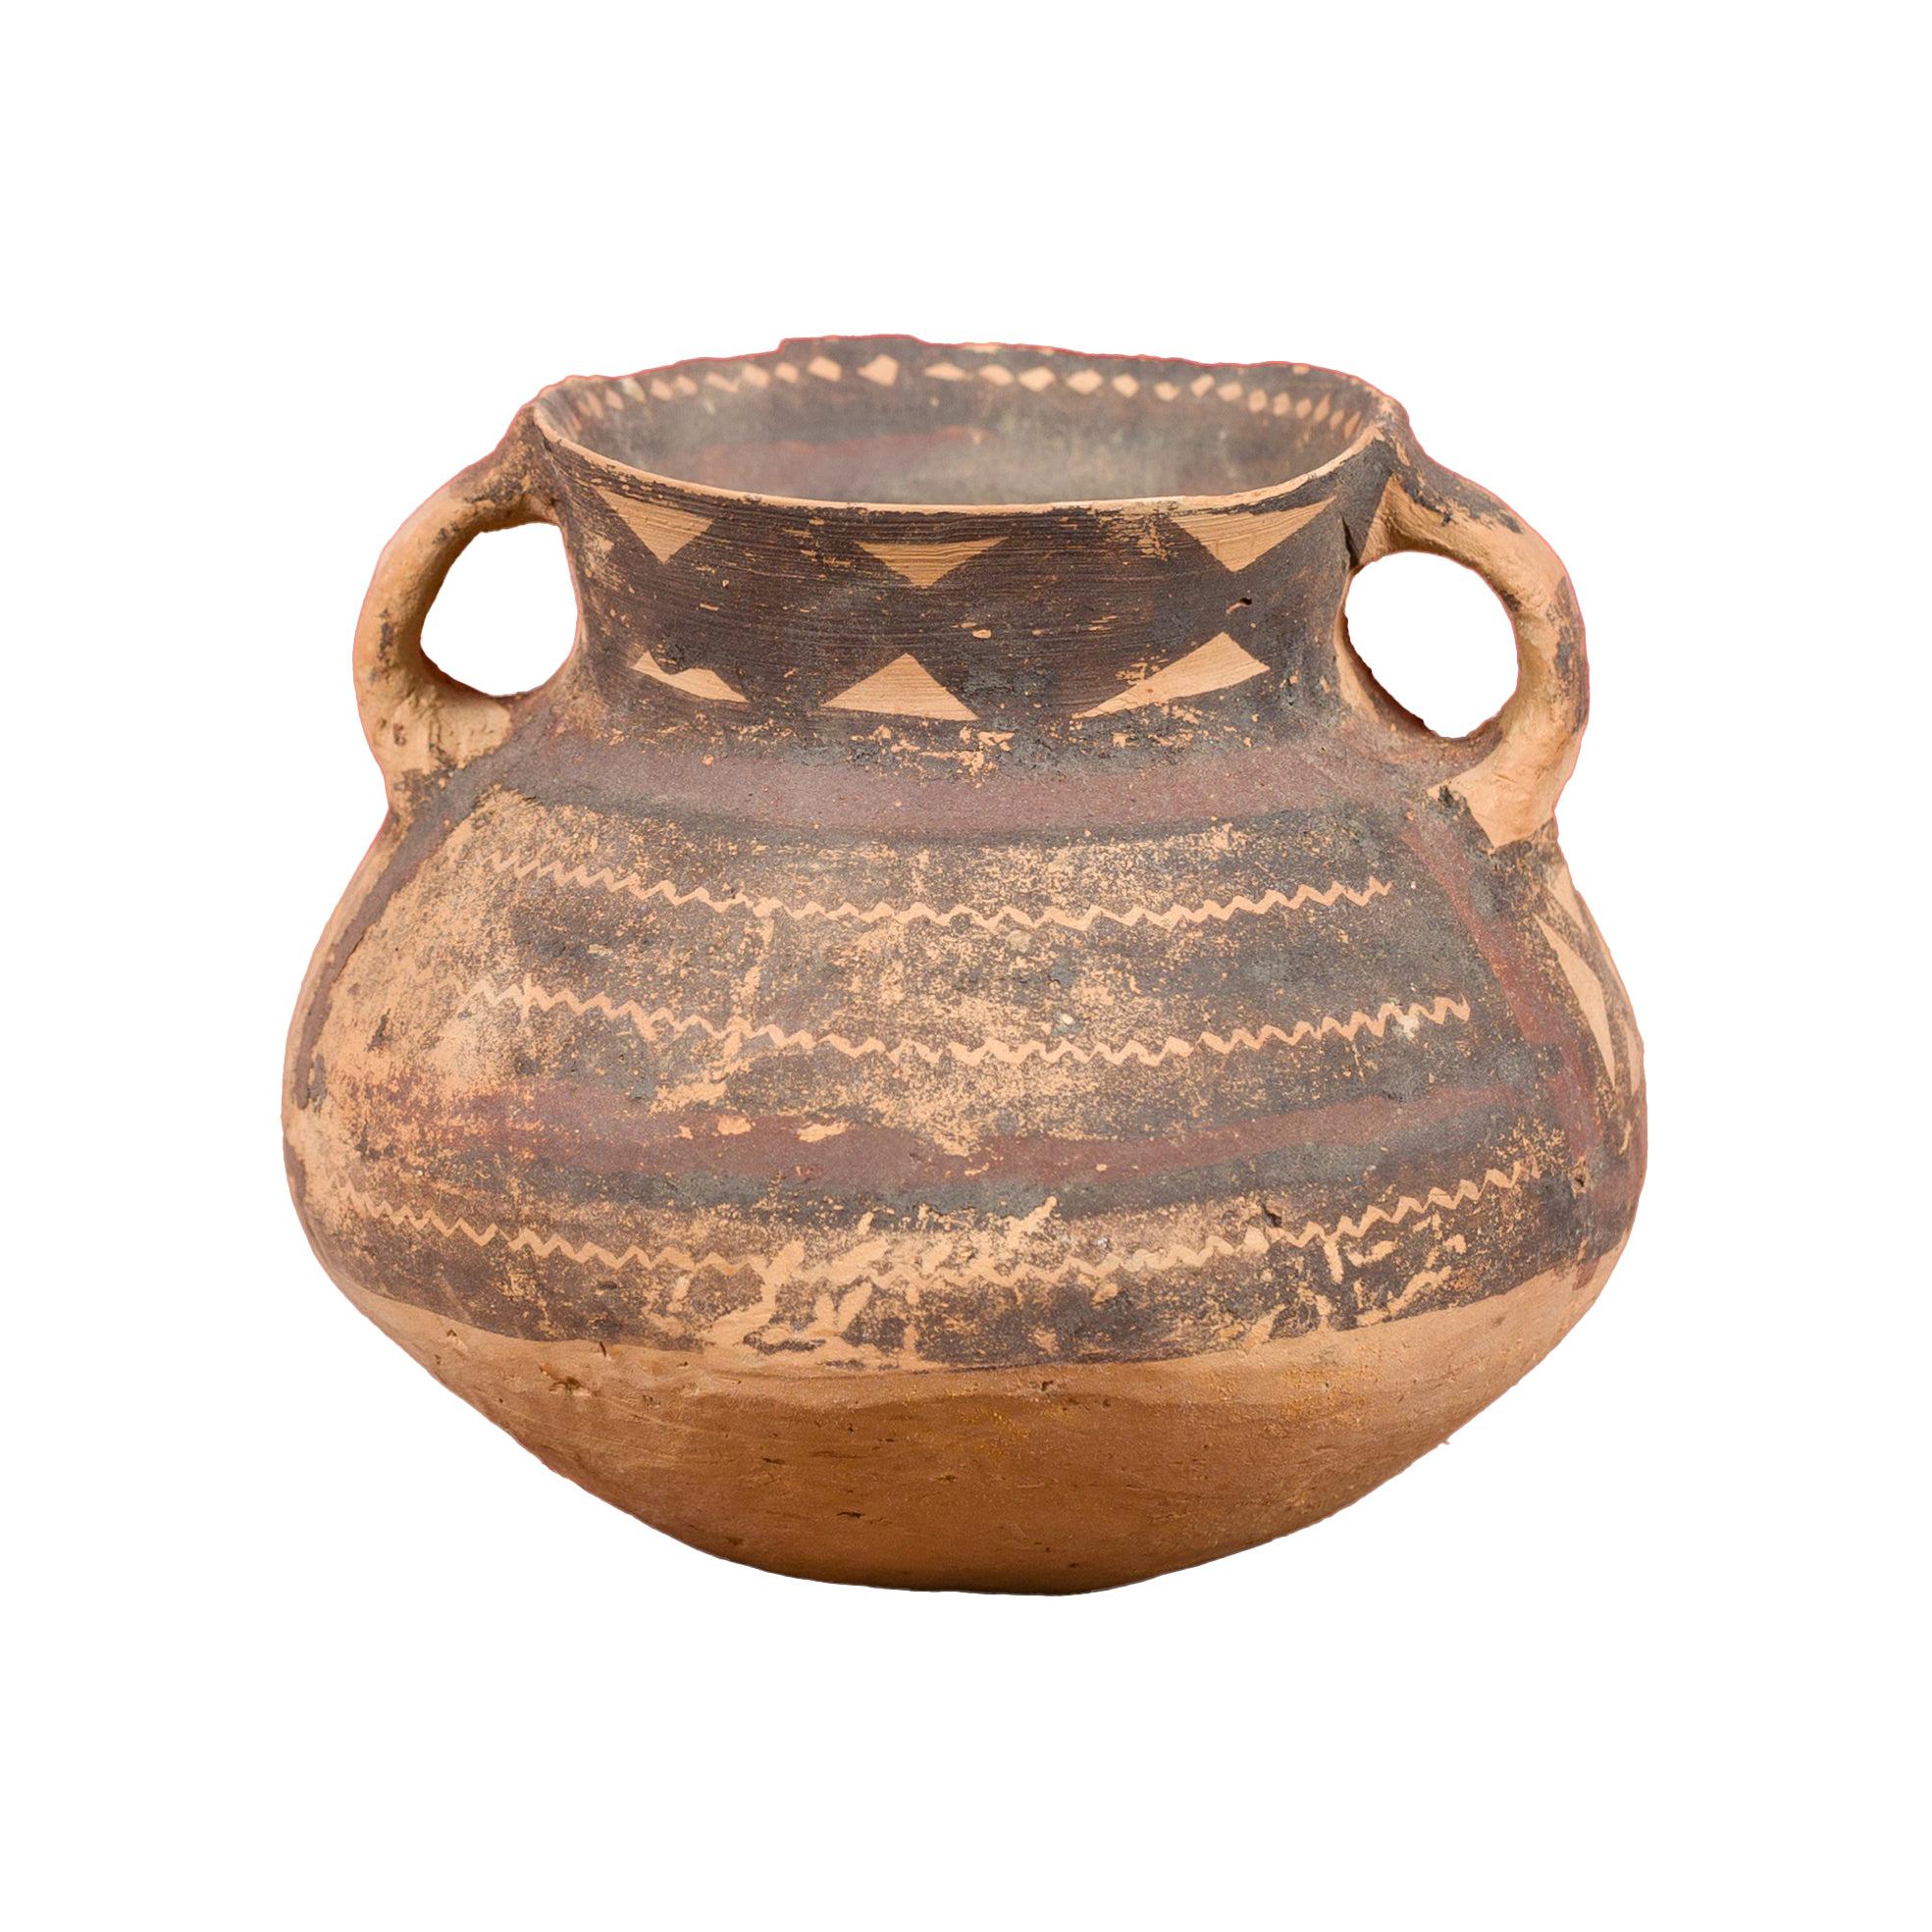 Petite Neolithic Terracotta Pot with Brown Geometric Décor and Flaring Neck